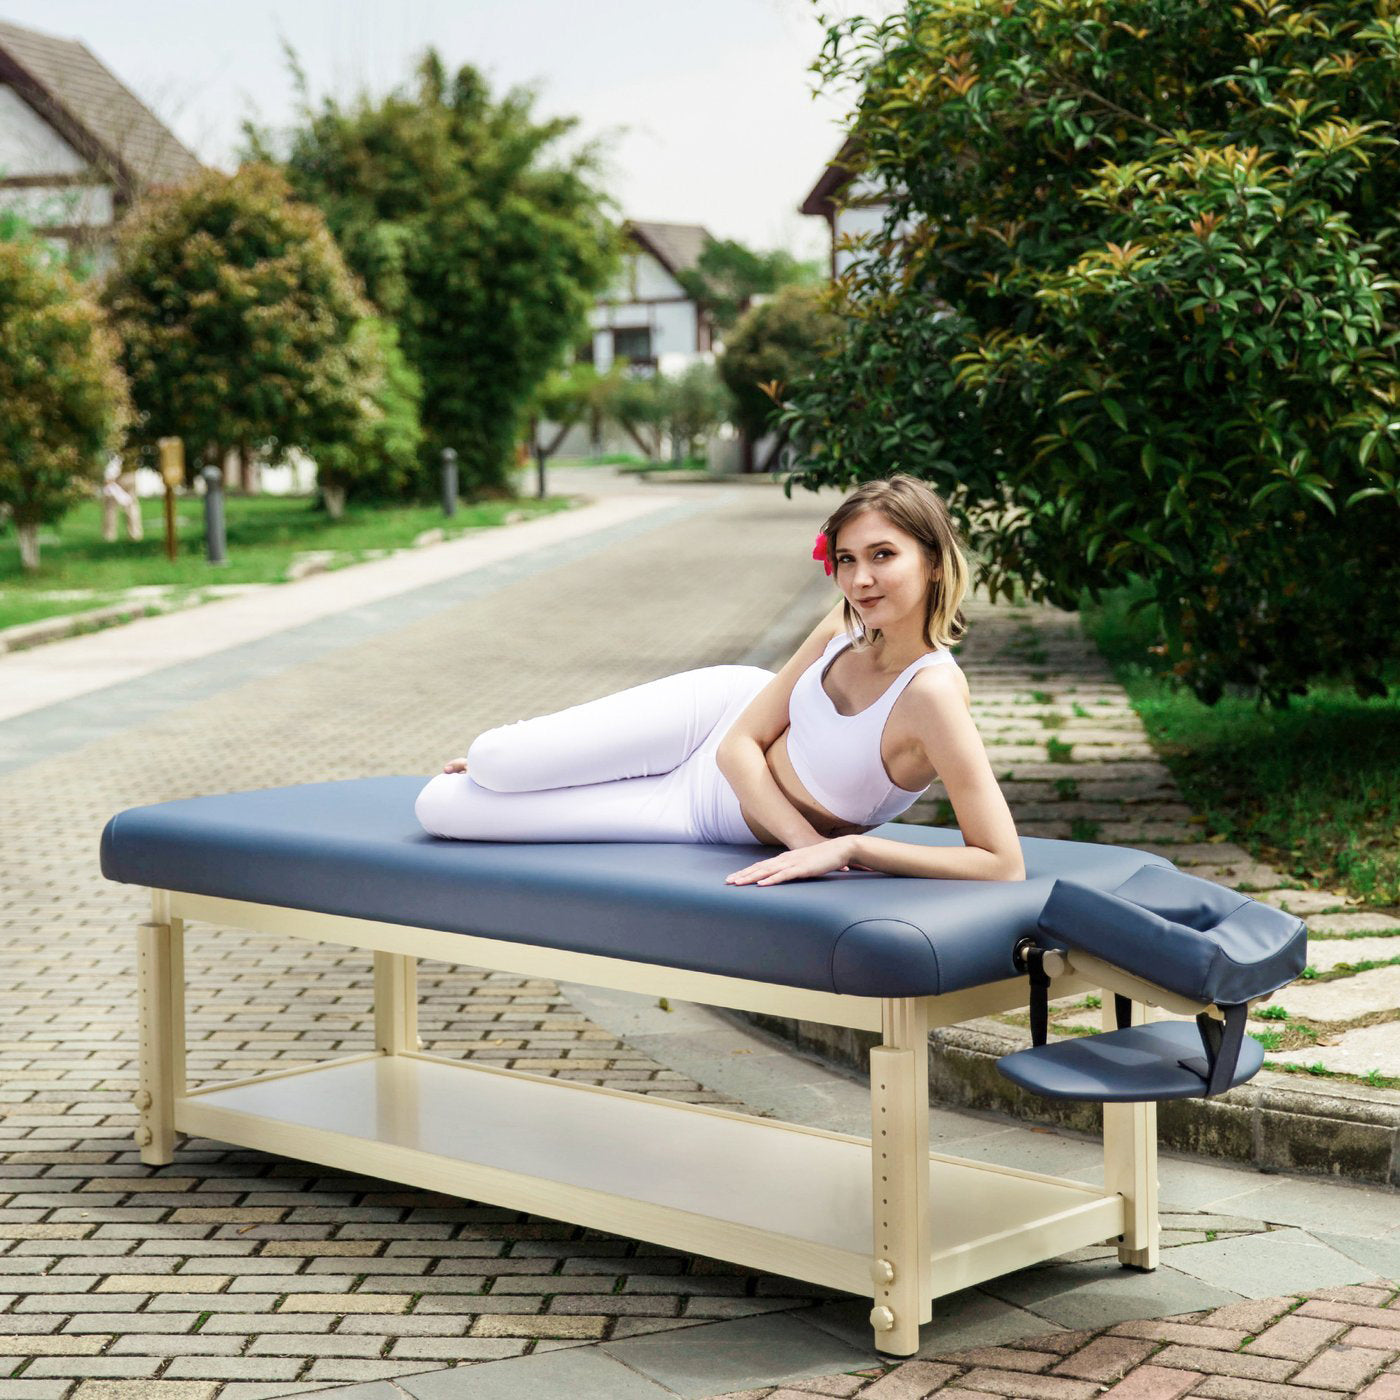 30" LAGUNA™ Stationary Massage Table Package - GREAT for Private Practitioners! (Navy Blue)